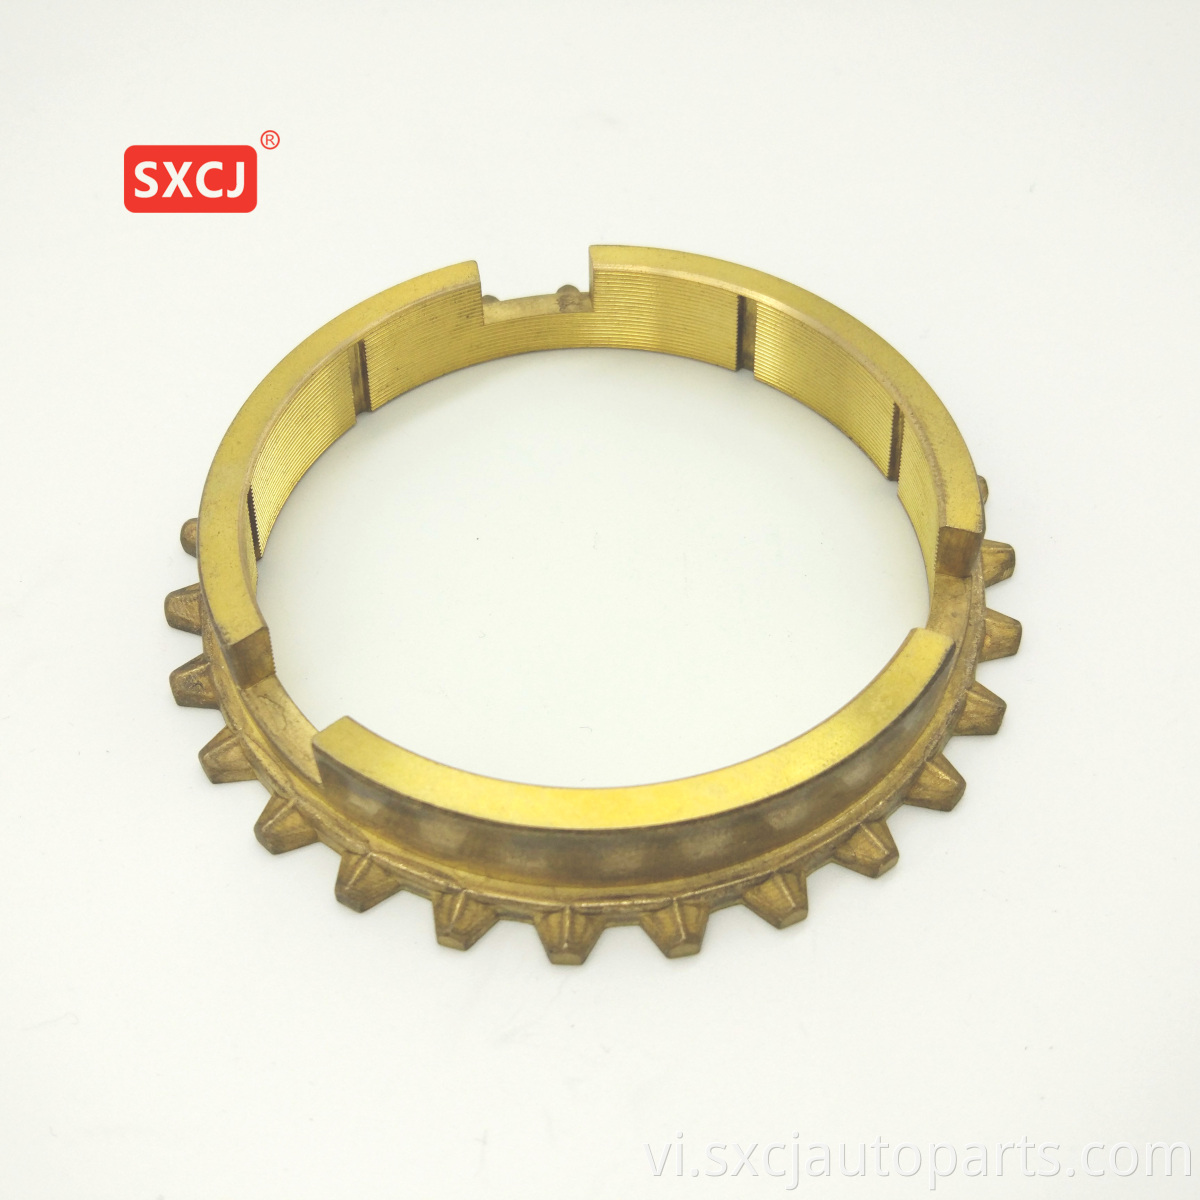 Transmission Gear Part Cone